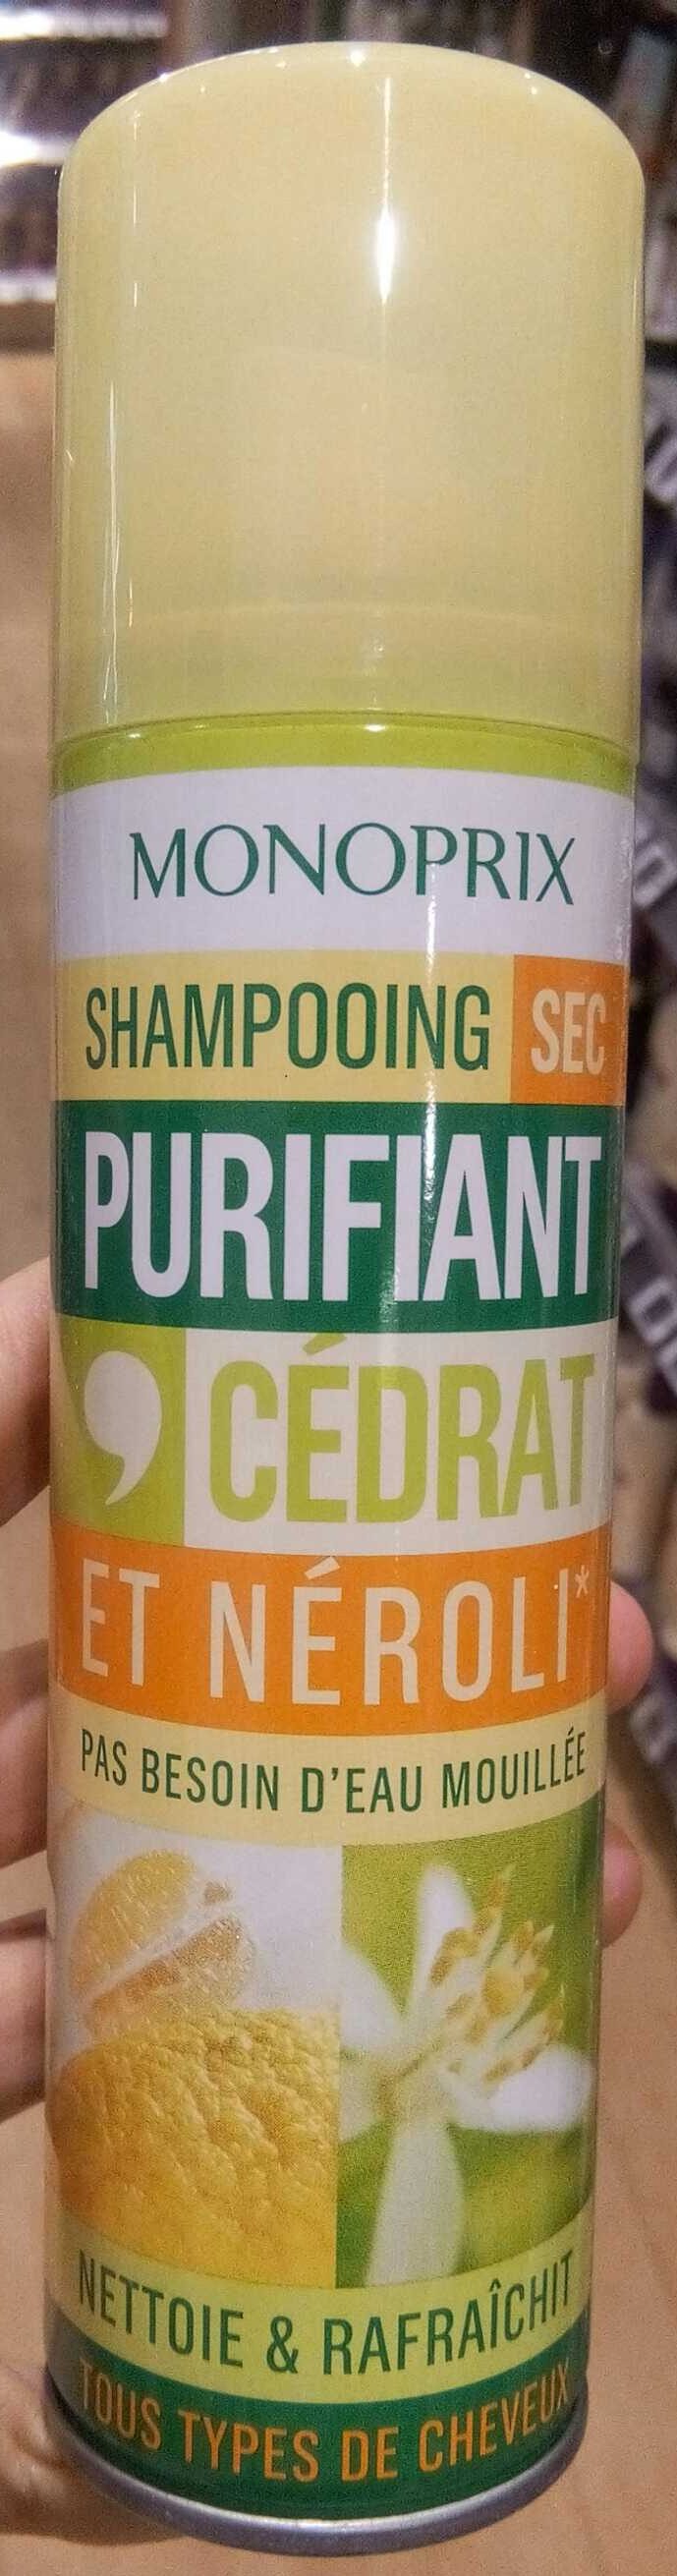 Shampoing sec - Tuote - fr